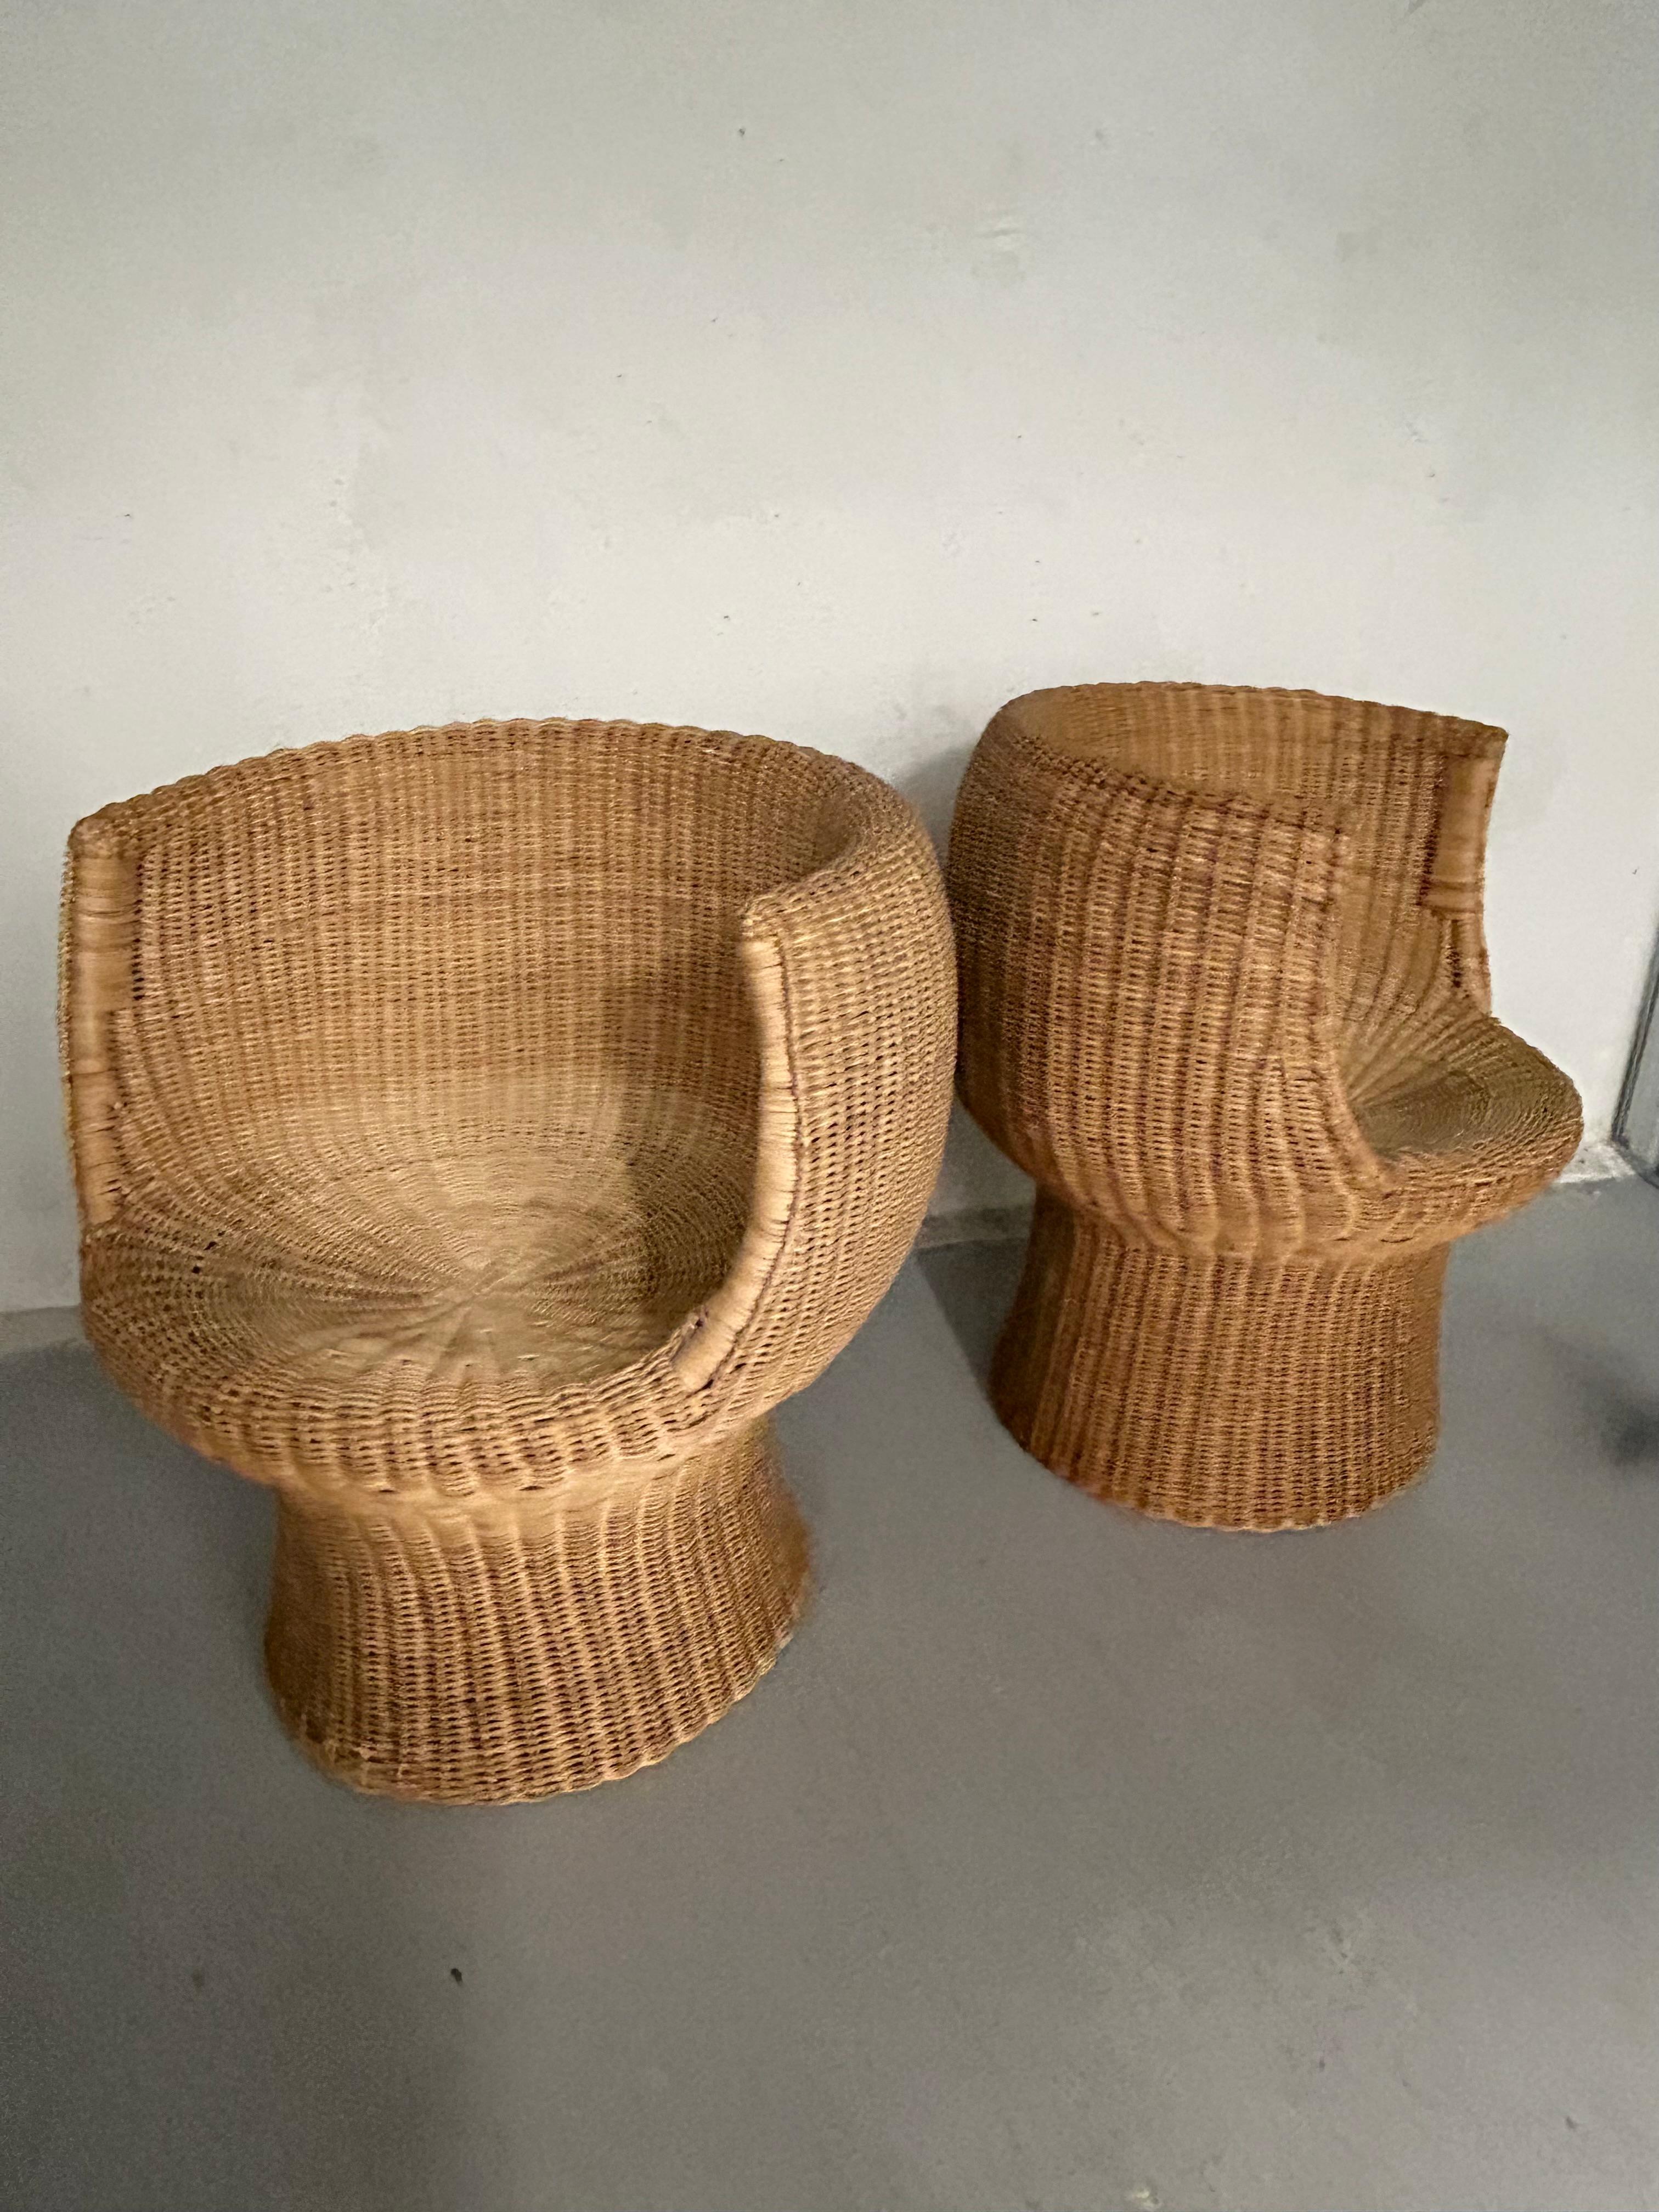 Vintage 70s wicker accent chairs. Original brown upholstered cushion included. A little wear to bottom edge and cushions have normal wear for age. Selling individually 

29” height
16” seat height
26” width
24” depth